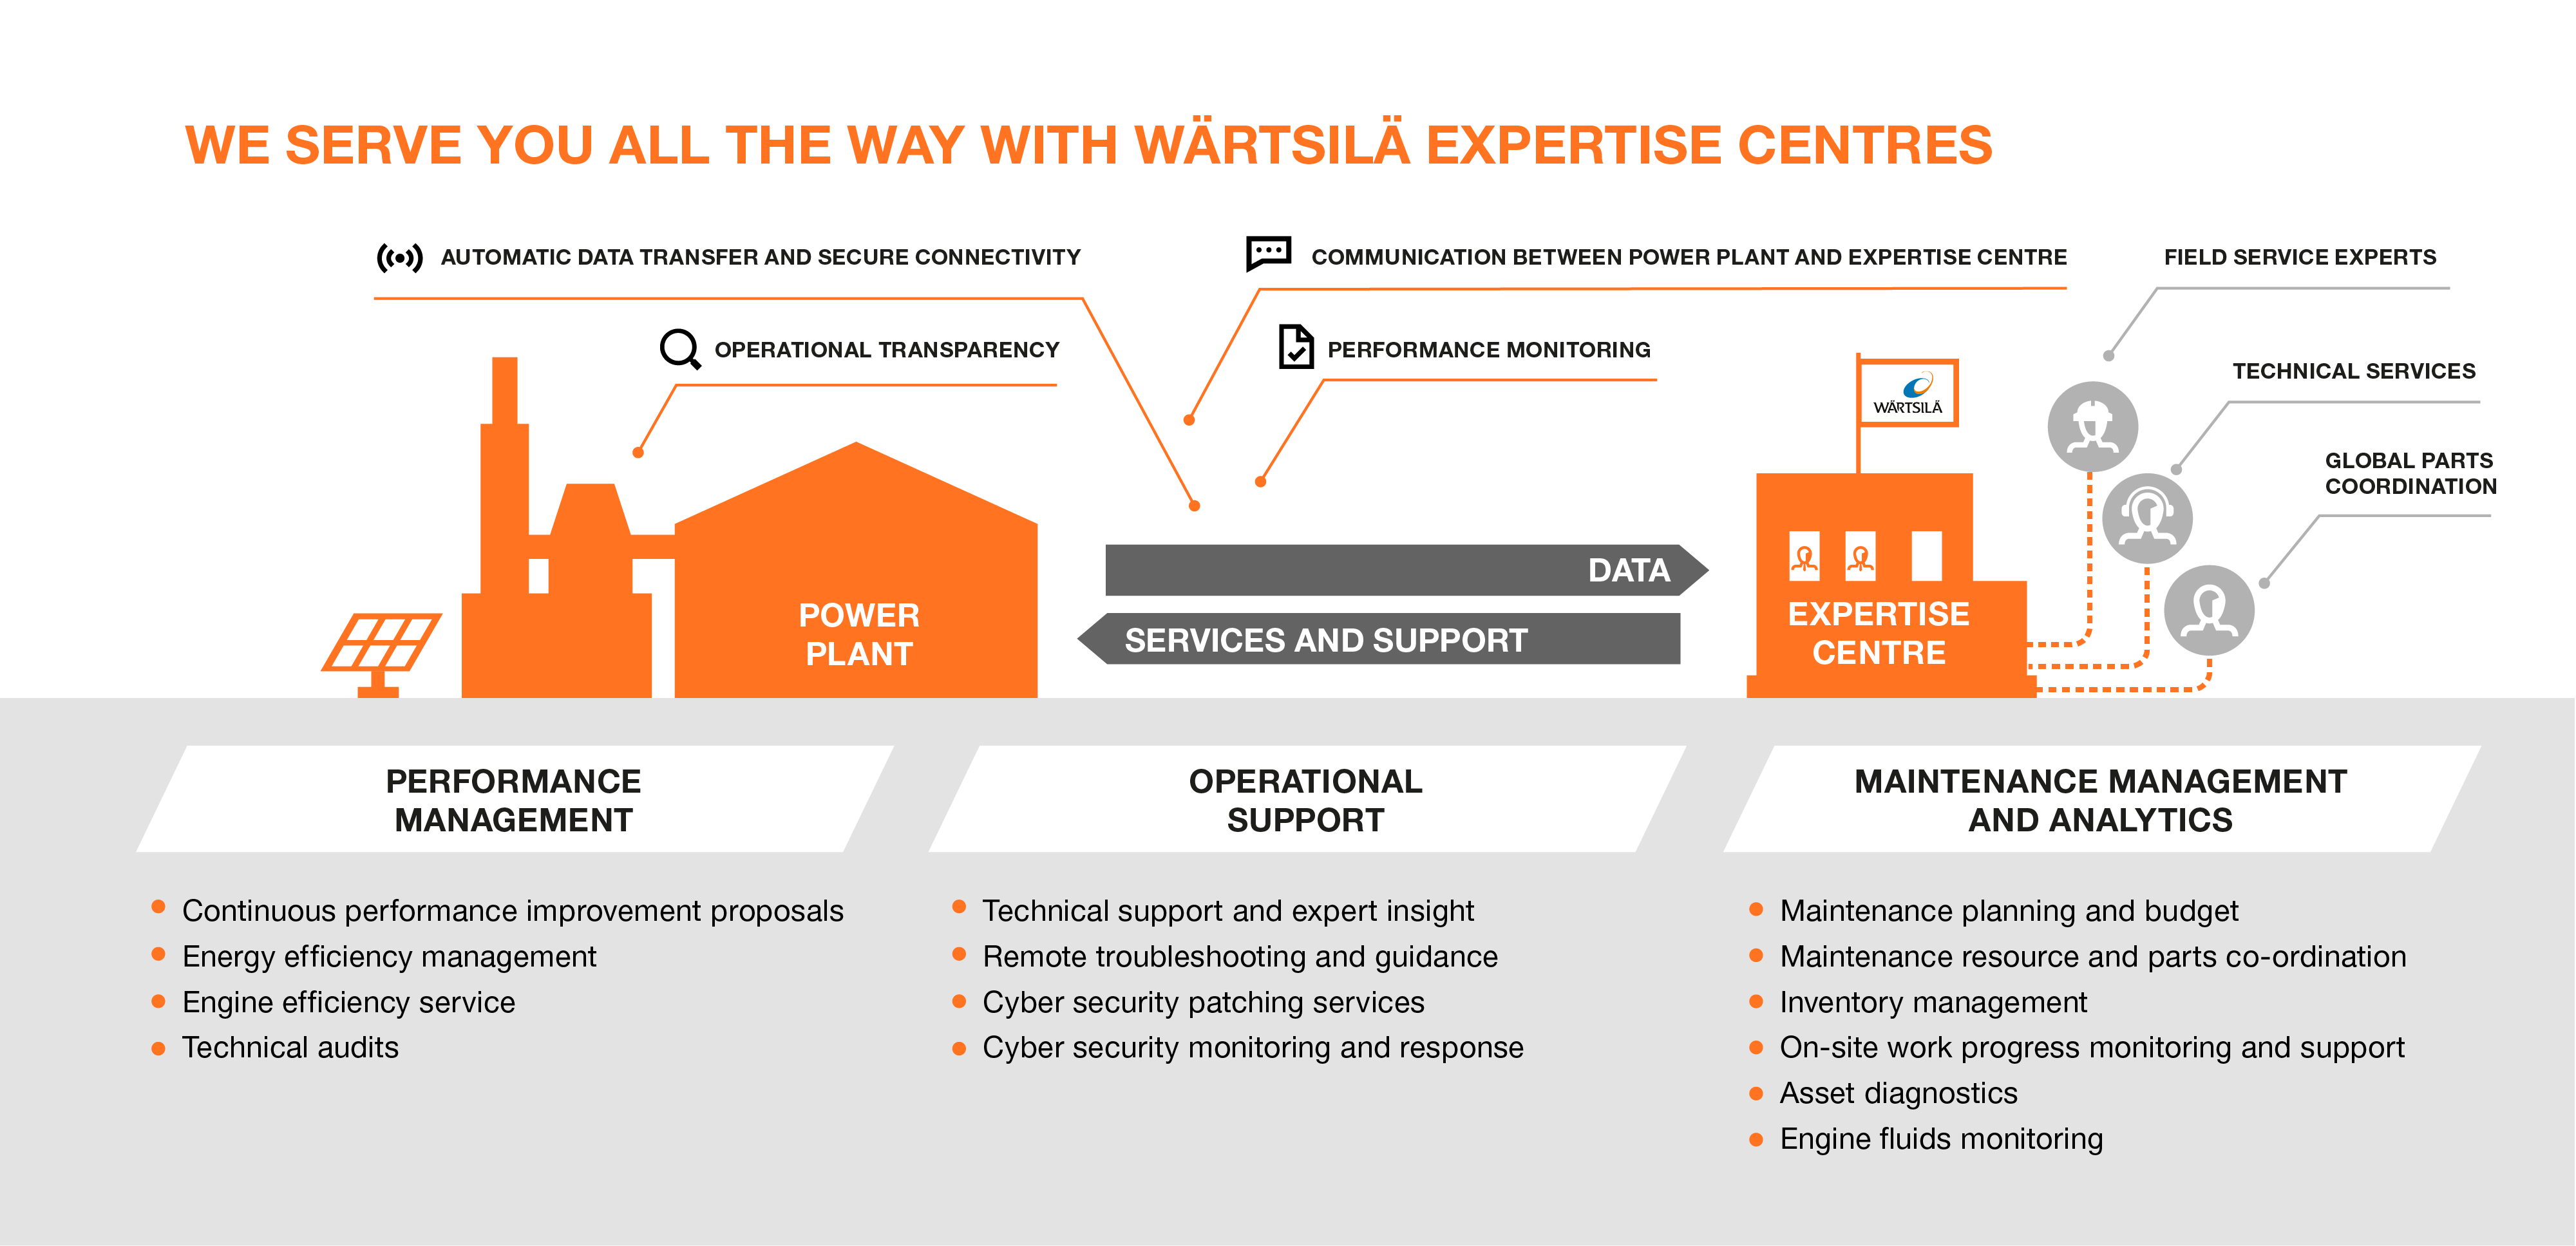 We serve you all the way with Wärtsilä expertise centres